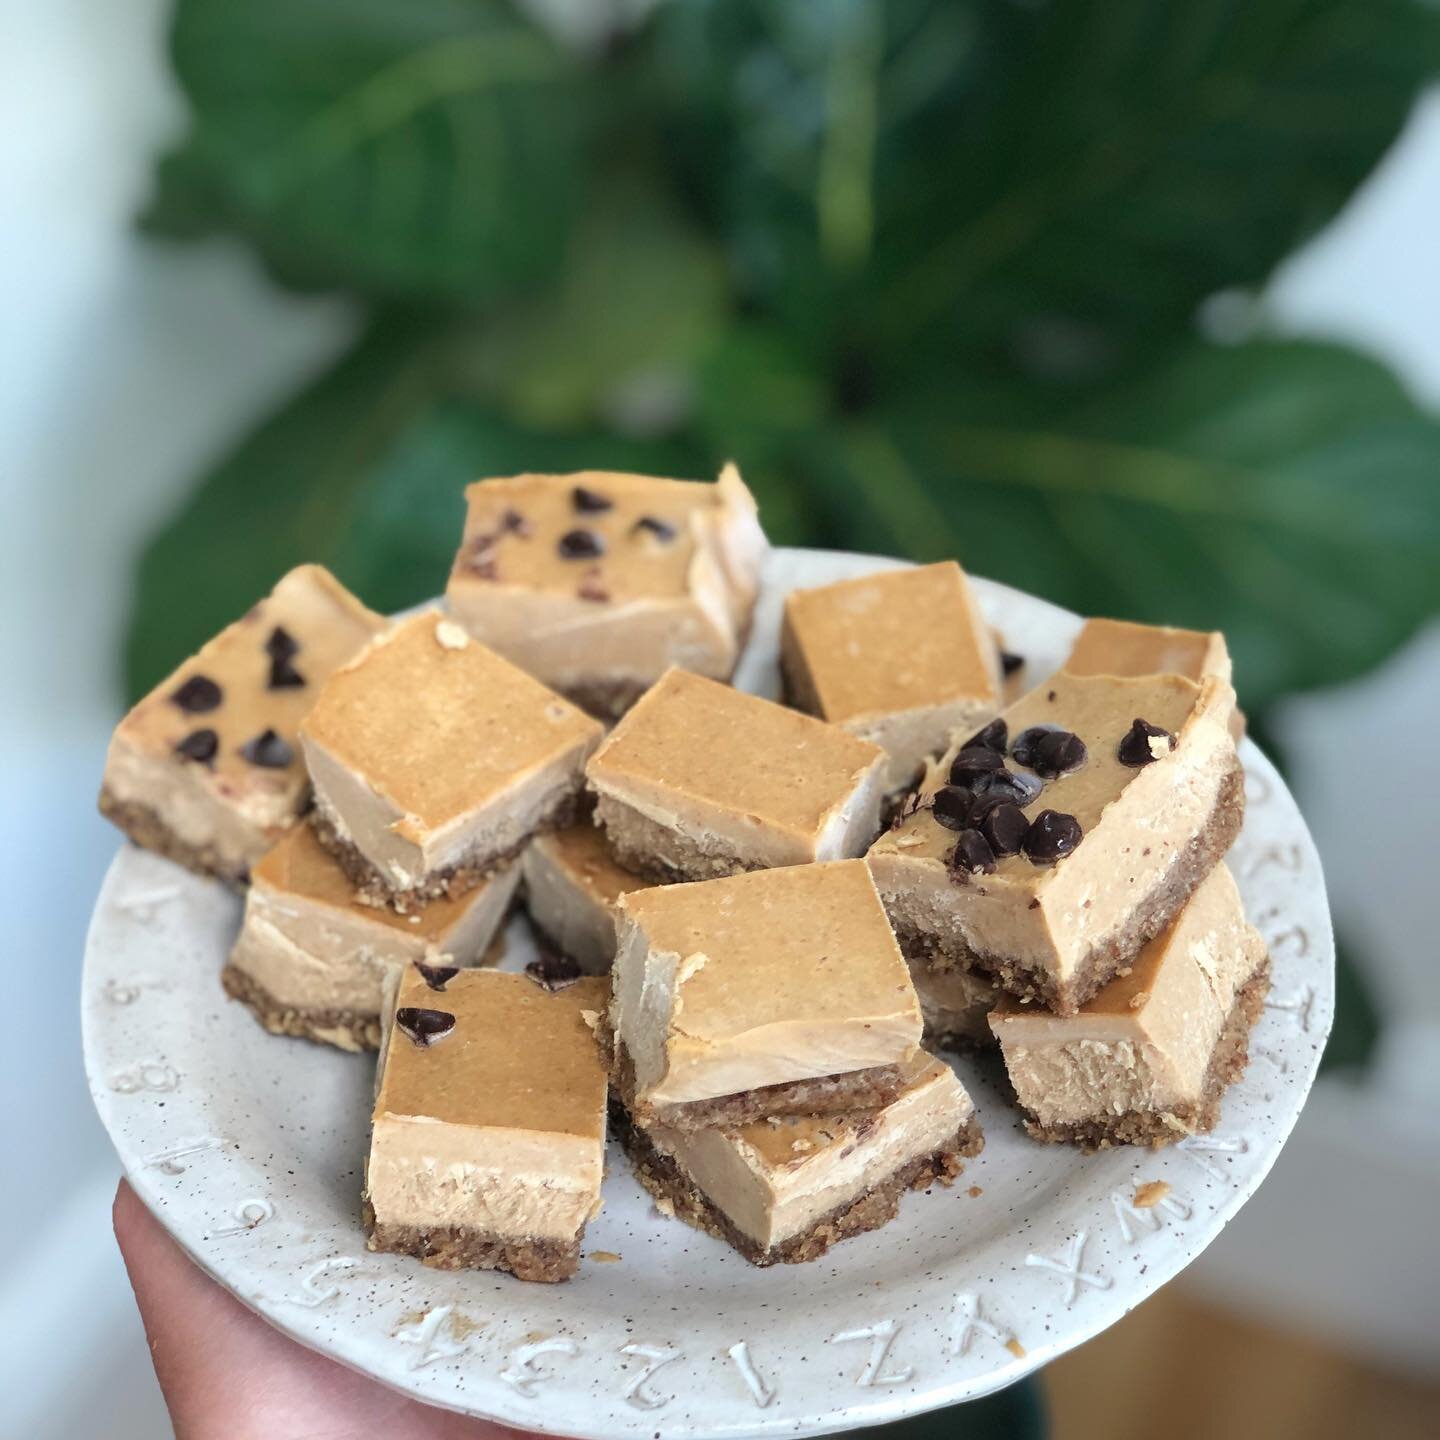 Frozen Peanut Butter BANANA Snack Bars! These are the perfect snack or dessert for my fellow peanut butter lovers out there! They taste like such a decadent treat, but they are made from just a few simple and healthy ingredients! Recipe now posted on